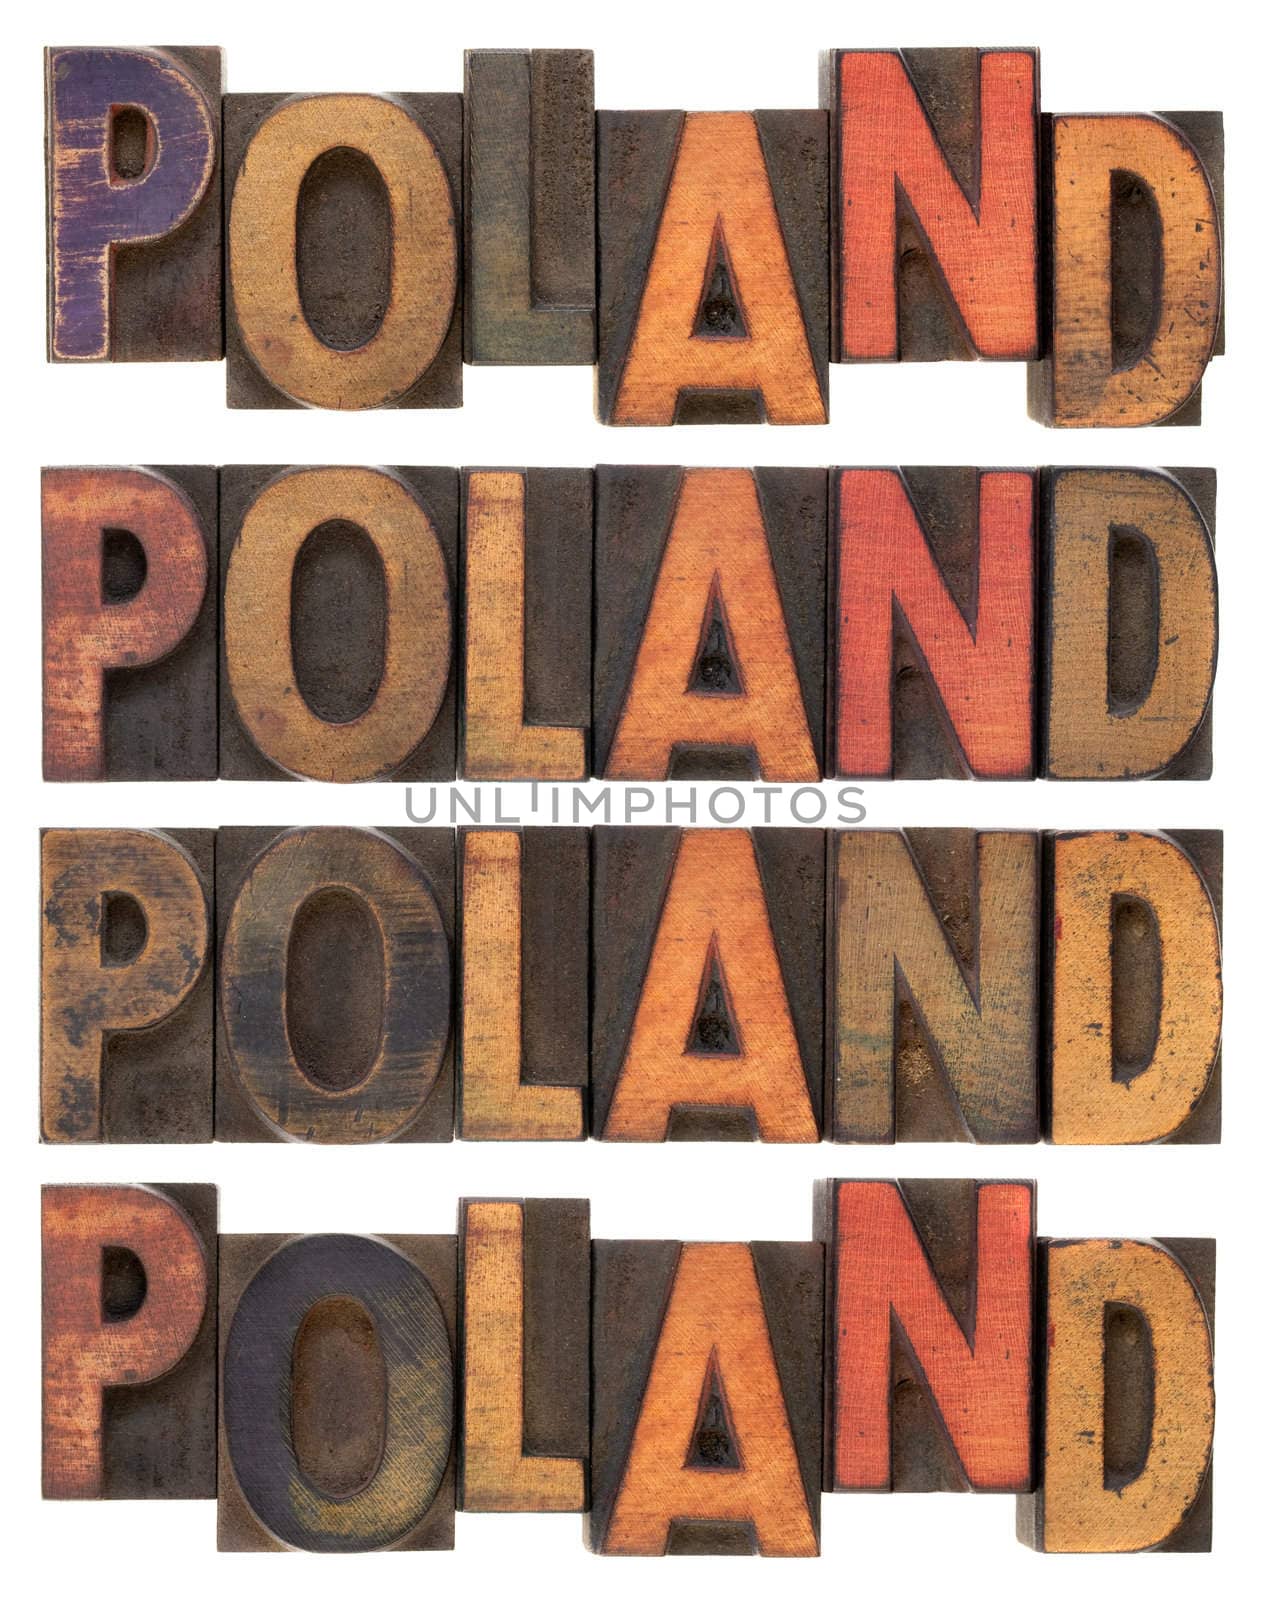 Poland in vintage wooden type by PixelsAway